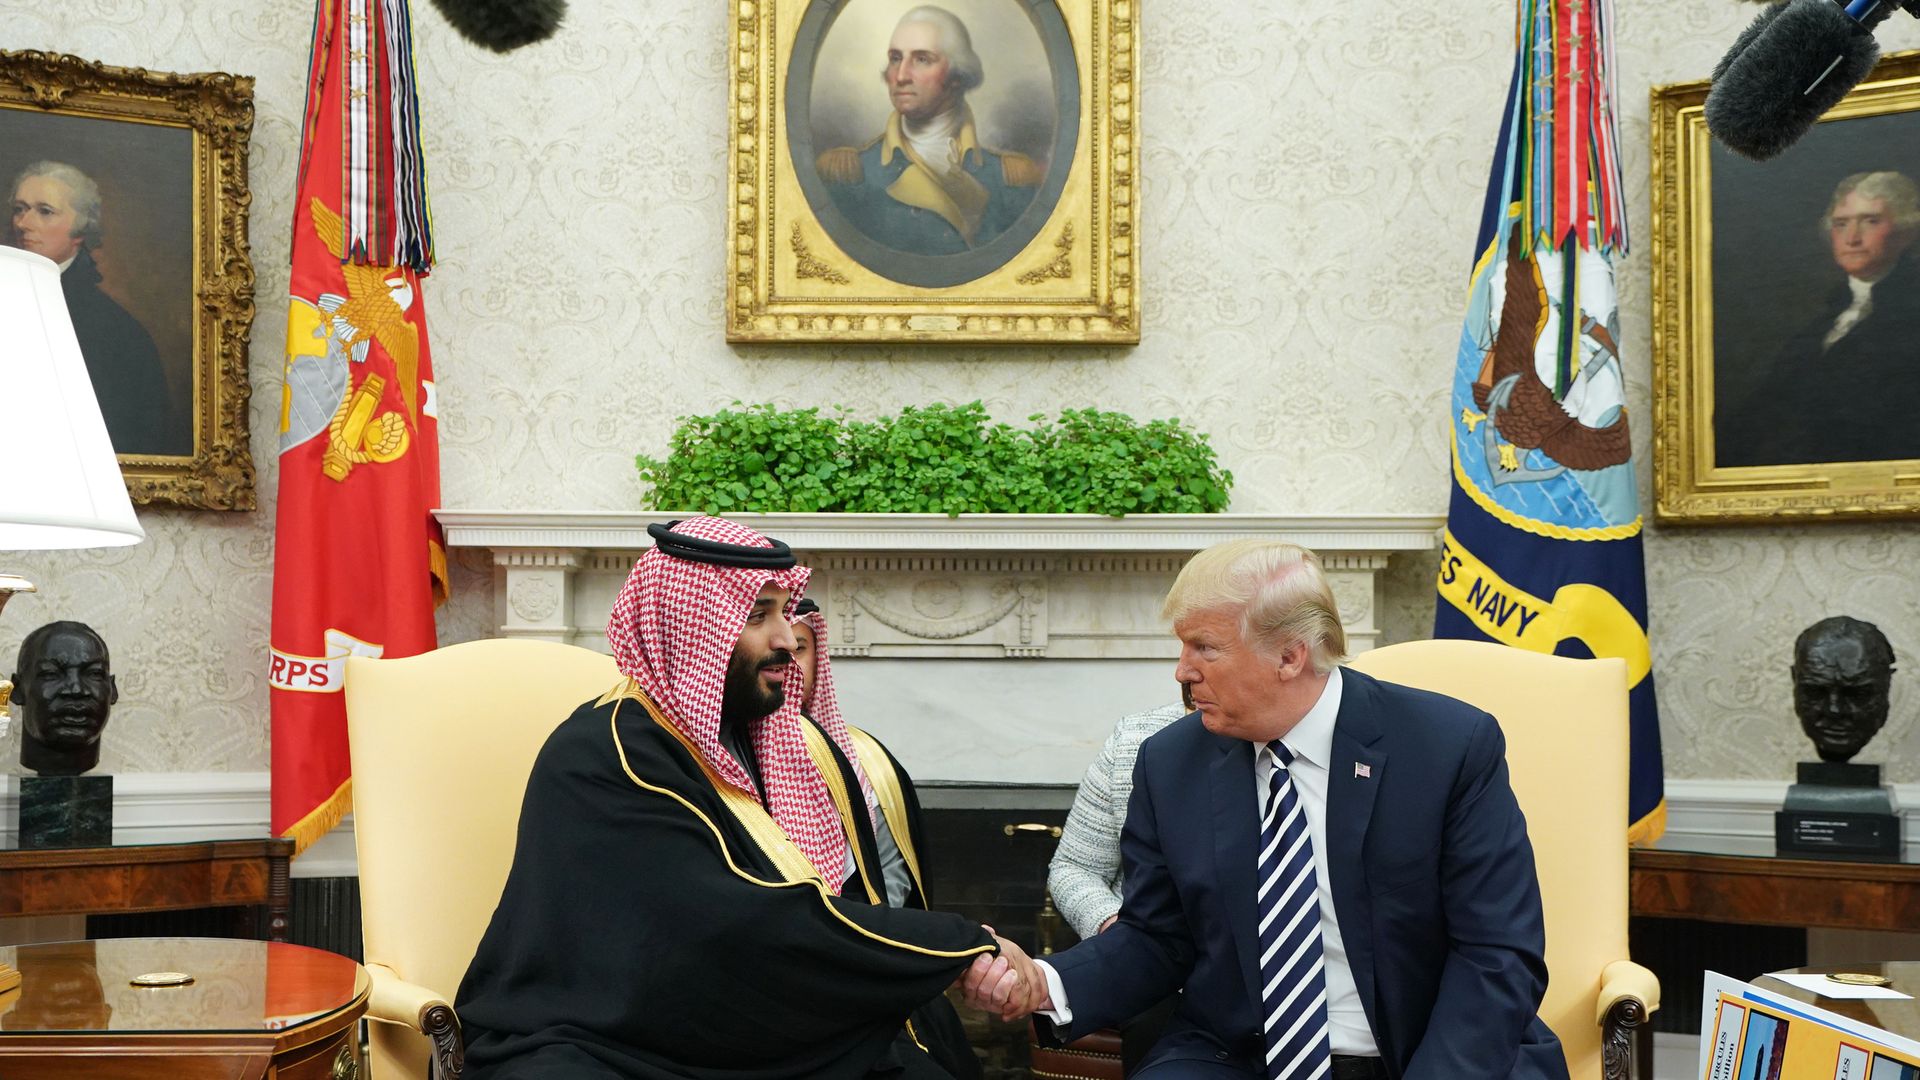 In this image, the Saudi crown prince shakes hands with President Trump in the Oval Office.